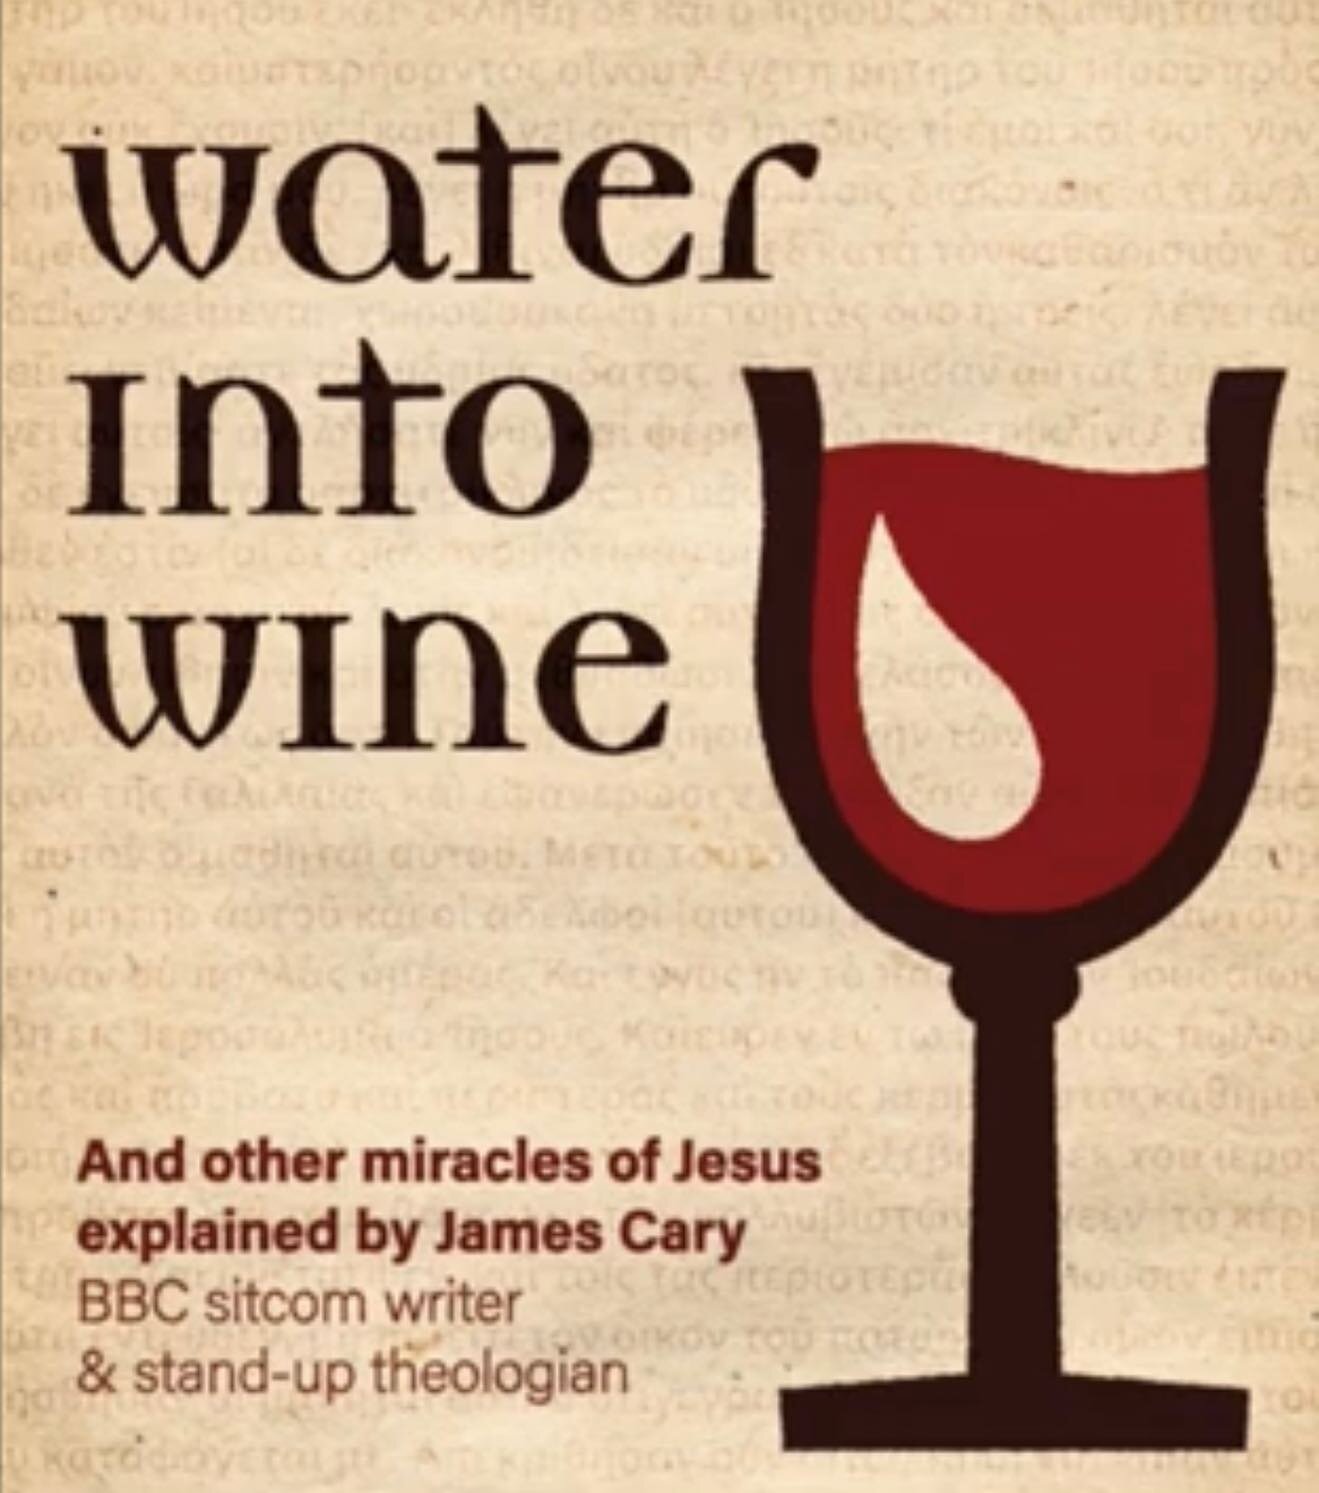 7.30pm Friday 8th April&hellip;

Bookings now open for James Cary's stand-up comedy show on the miracles of Jesus 🎭

Tickets are just &pound;12 which includes a glass of wine on entry 😊
 
A great opportunity to invite friends, neighbours and family